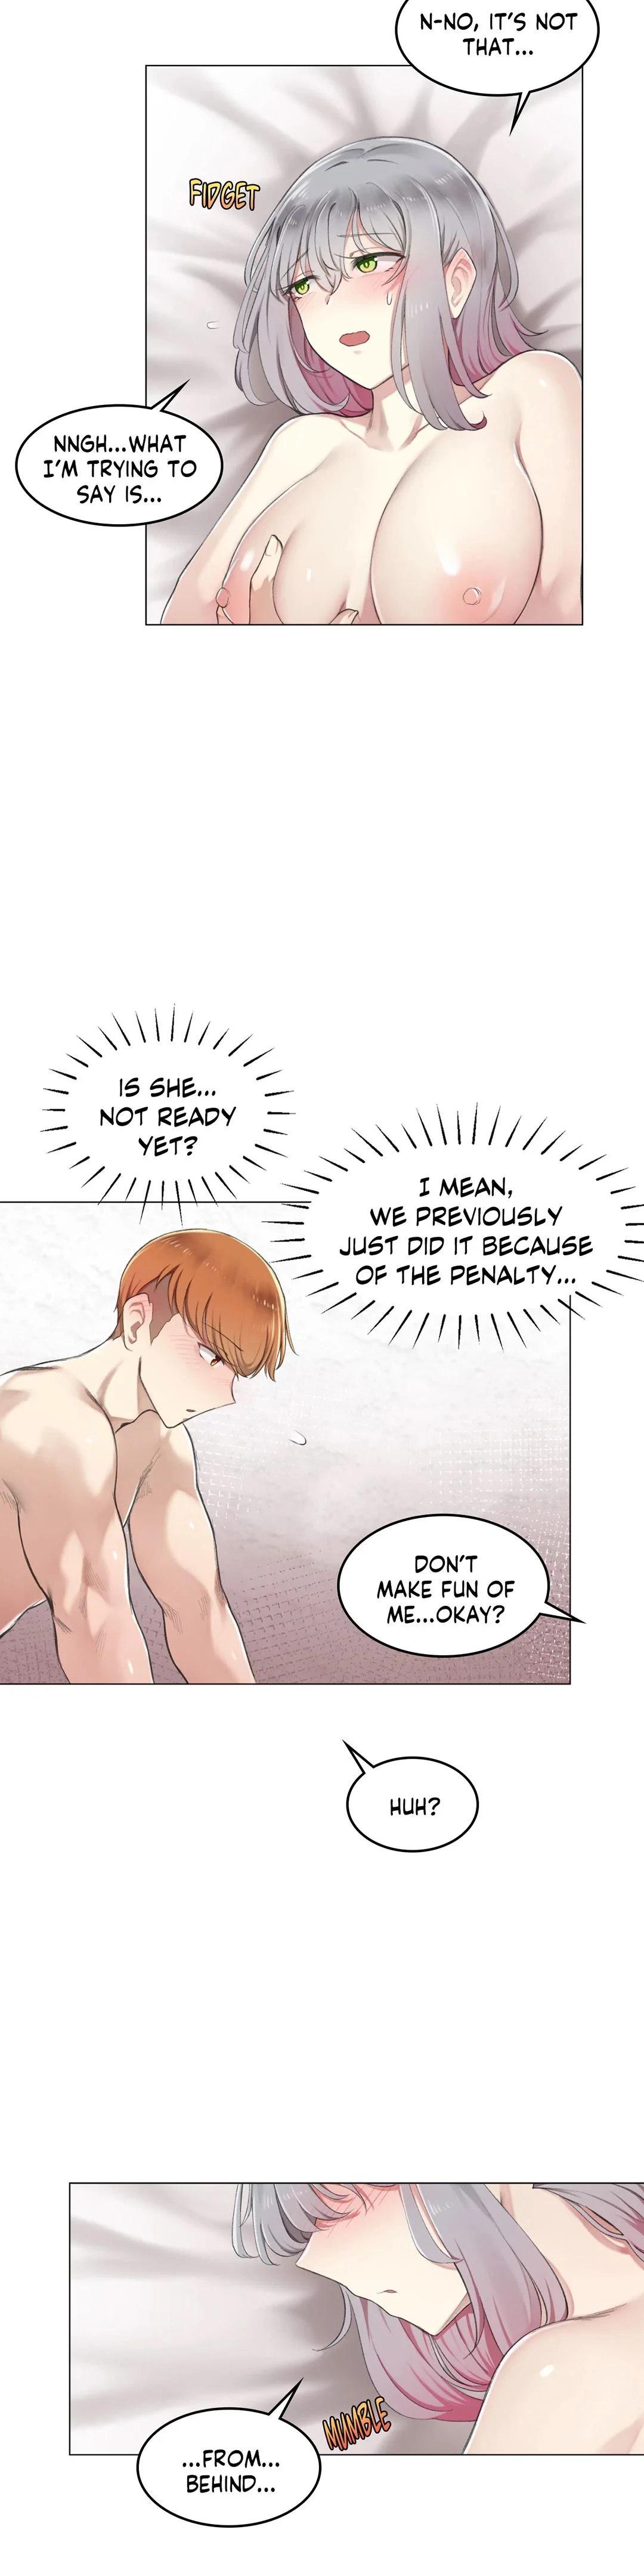 [Dumangoon, KONG_] Sexcape Room: Snap Off Ch.7/7 [English] [Manhwa PDF] Completed 202